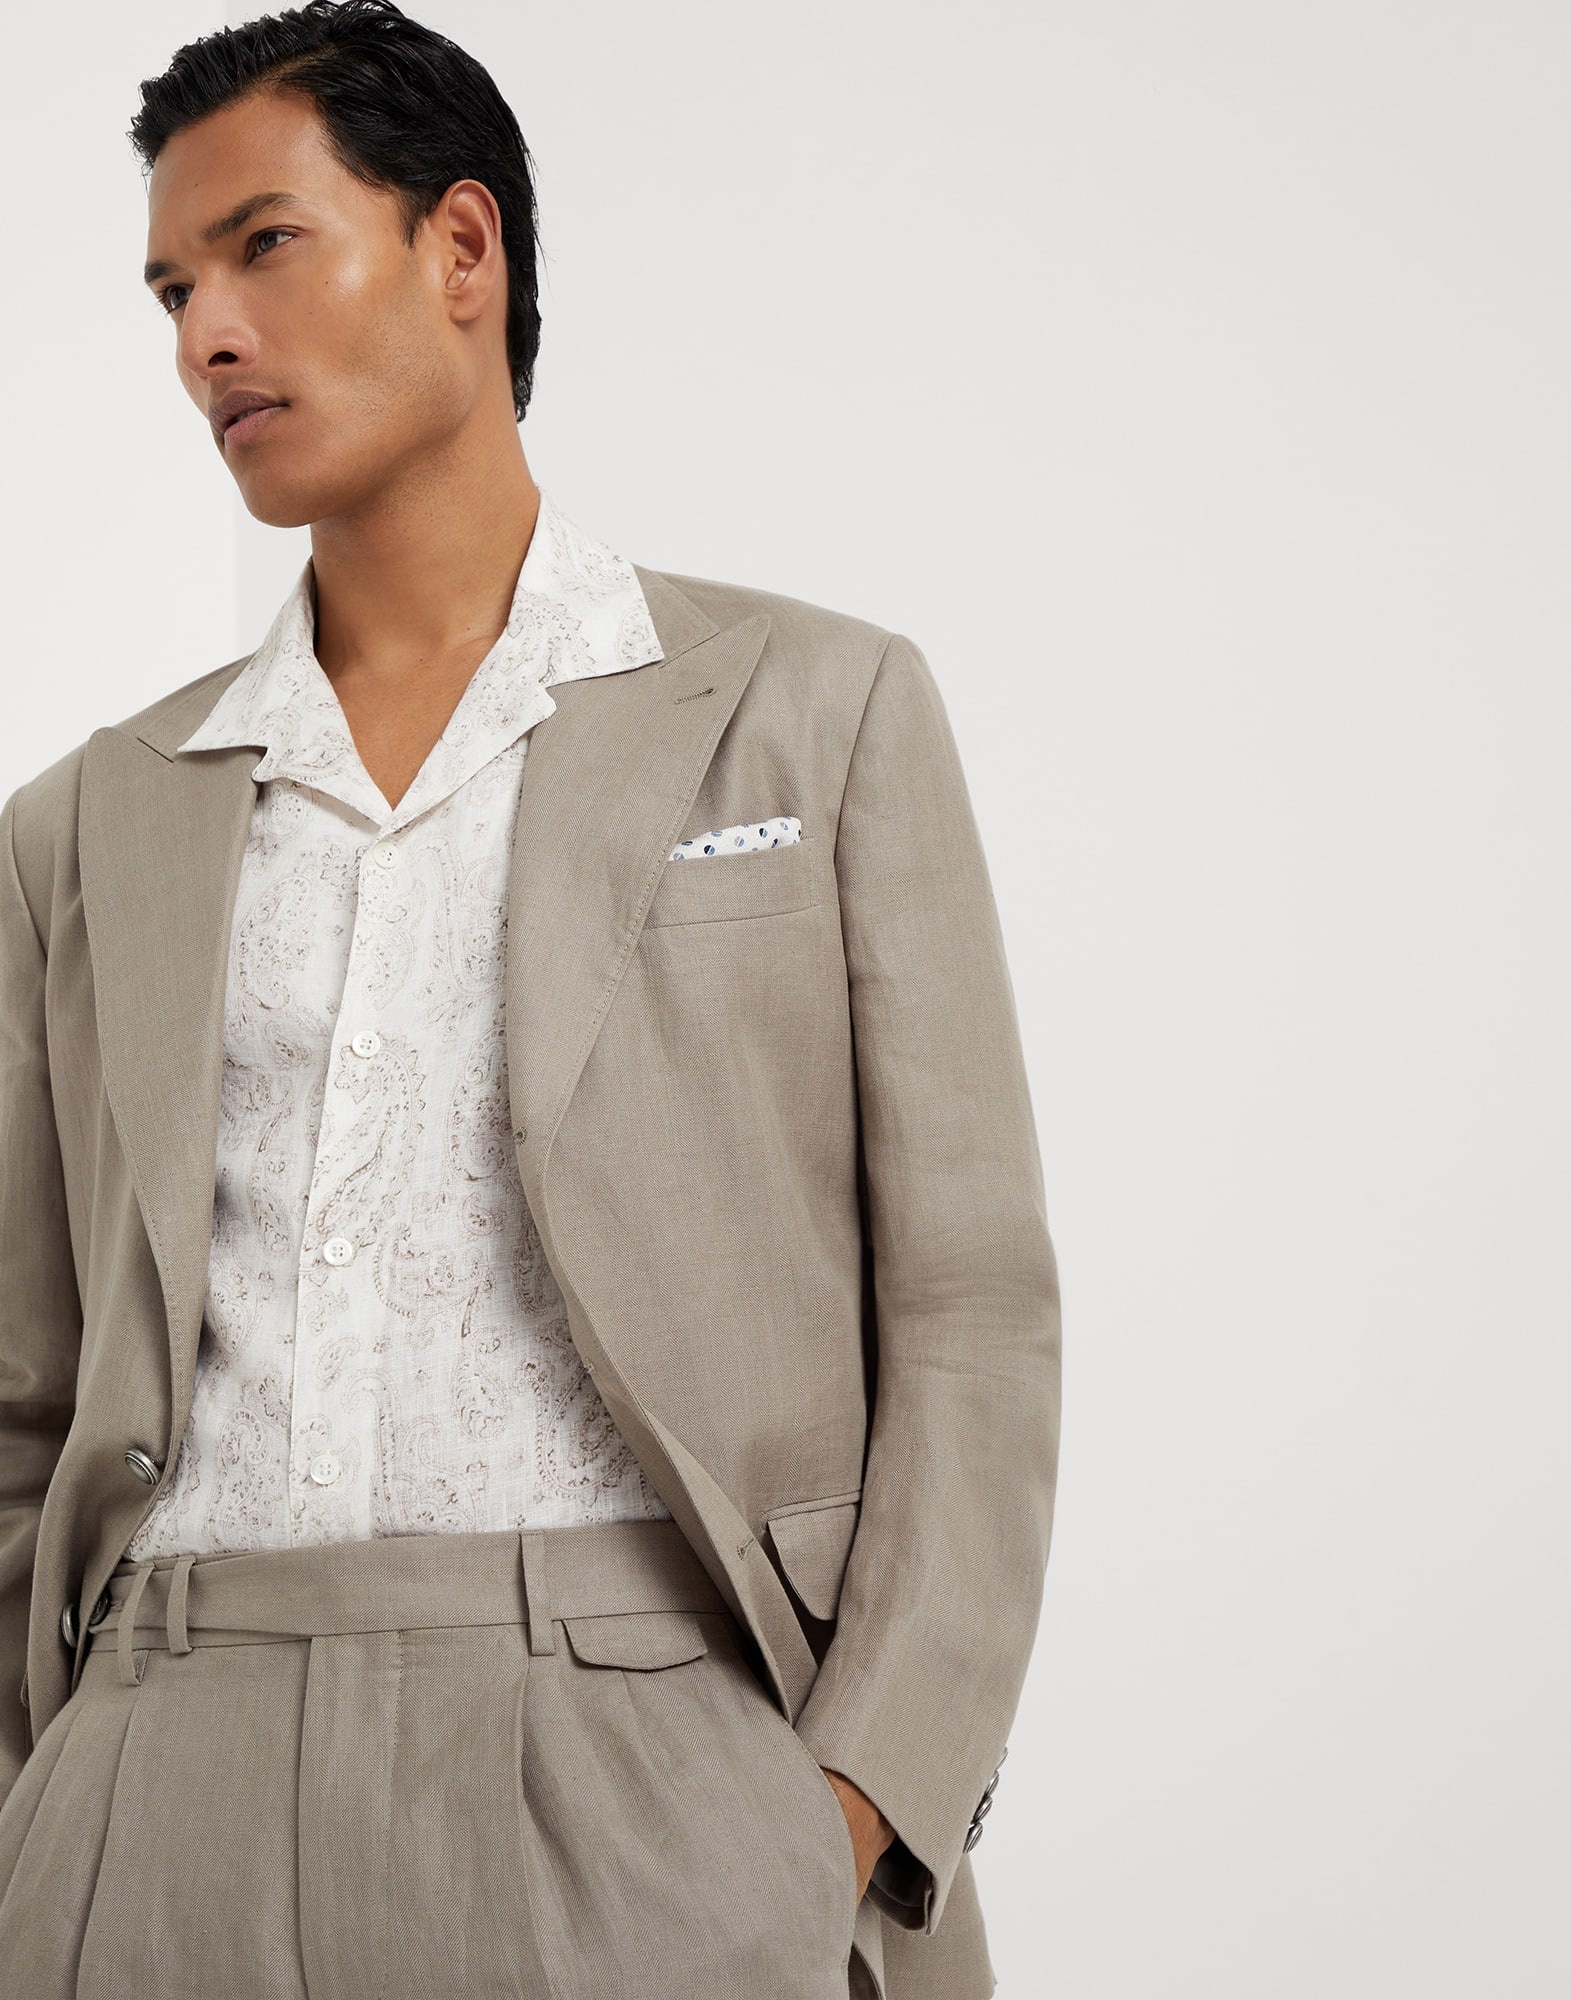 Linen micro chevron Leisure suit: peak lapel jacket with metal buttons and double-pleated trousers - 3